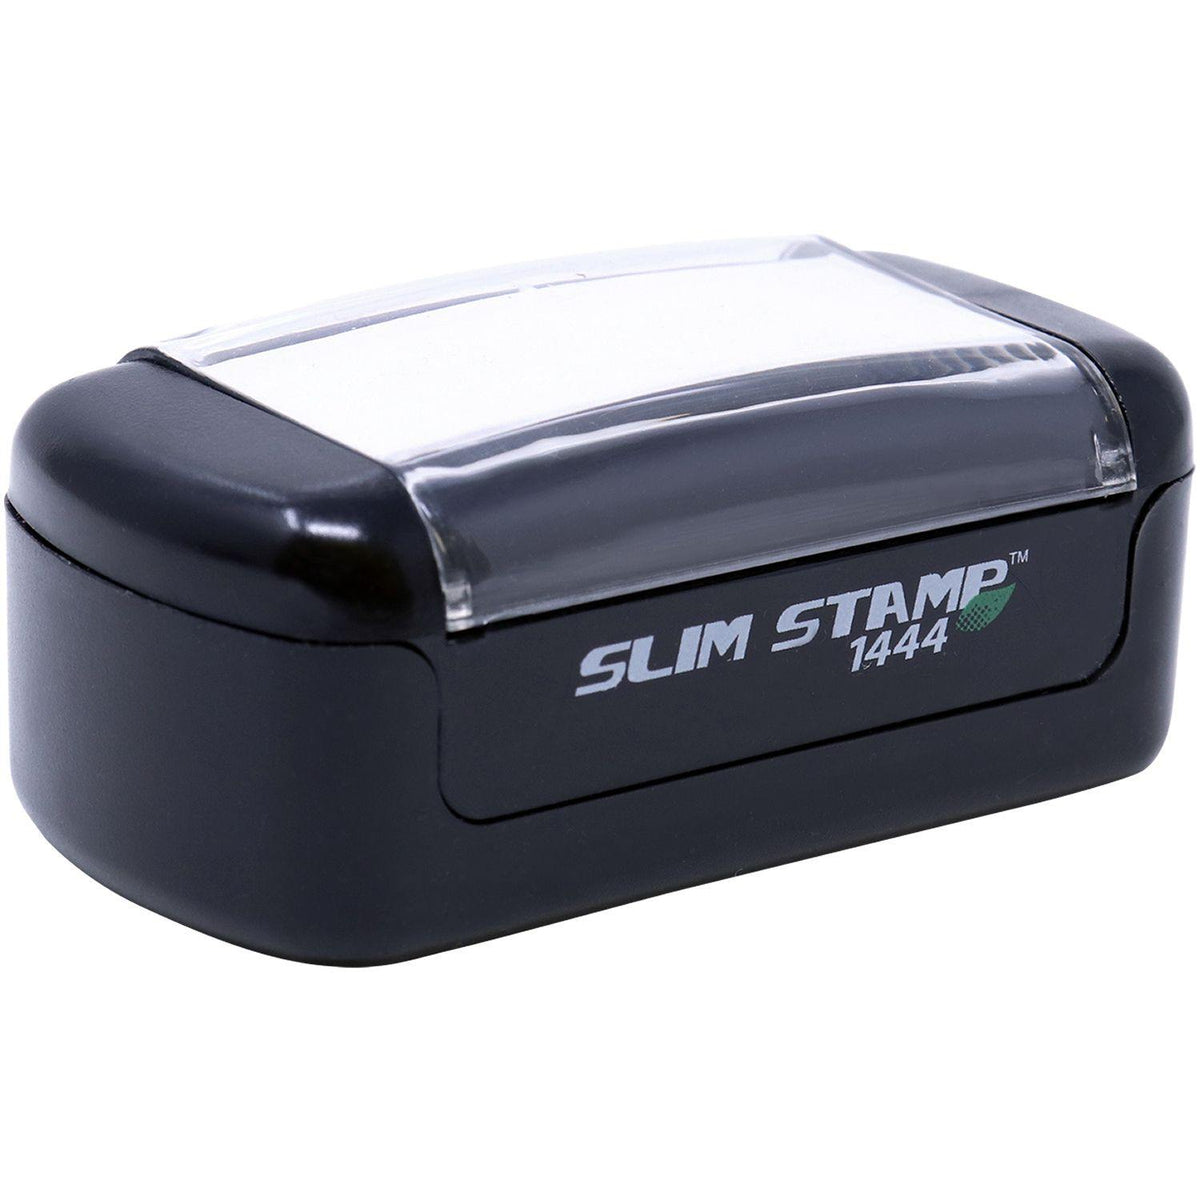 Alt View of Slim Pre Inked Draft Stamp Mount Angle